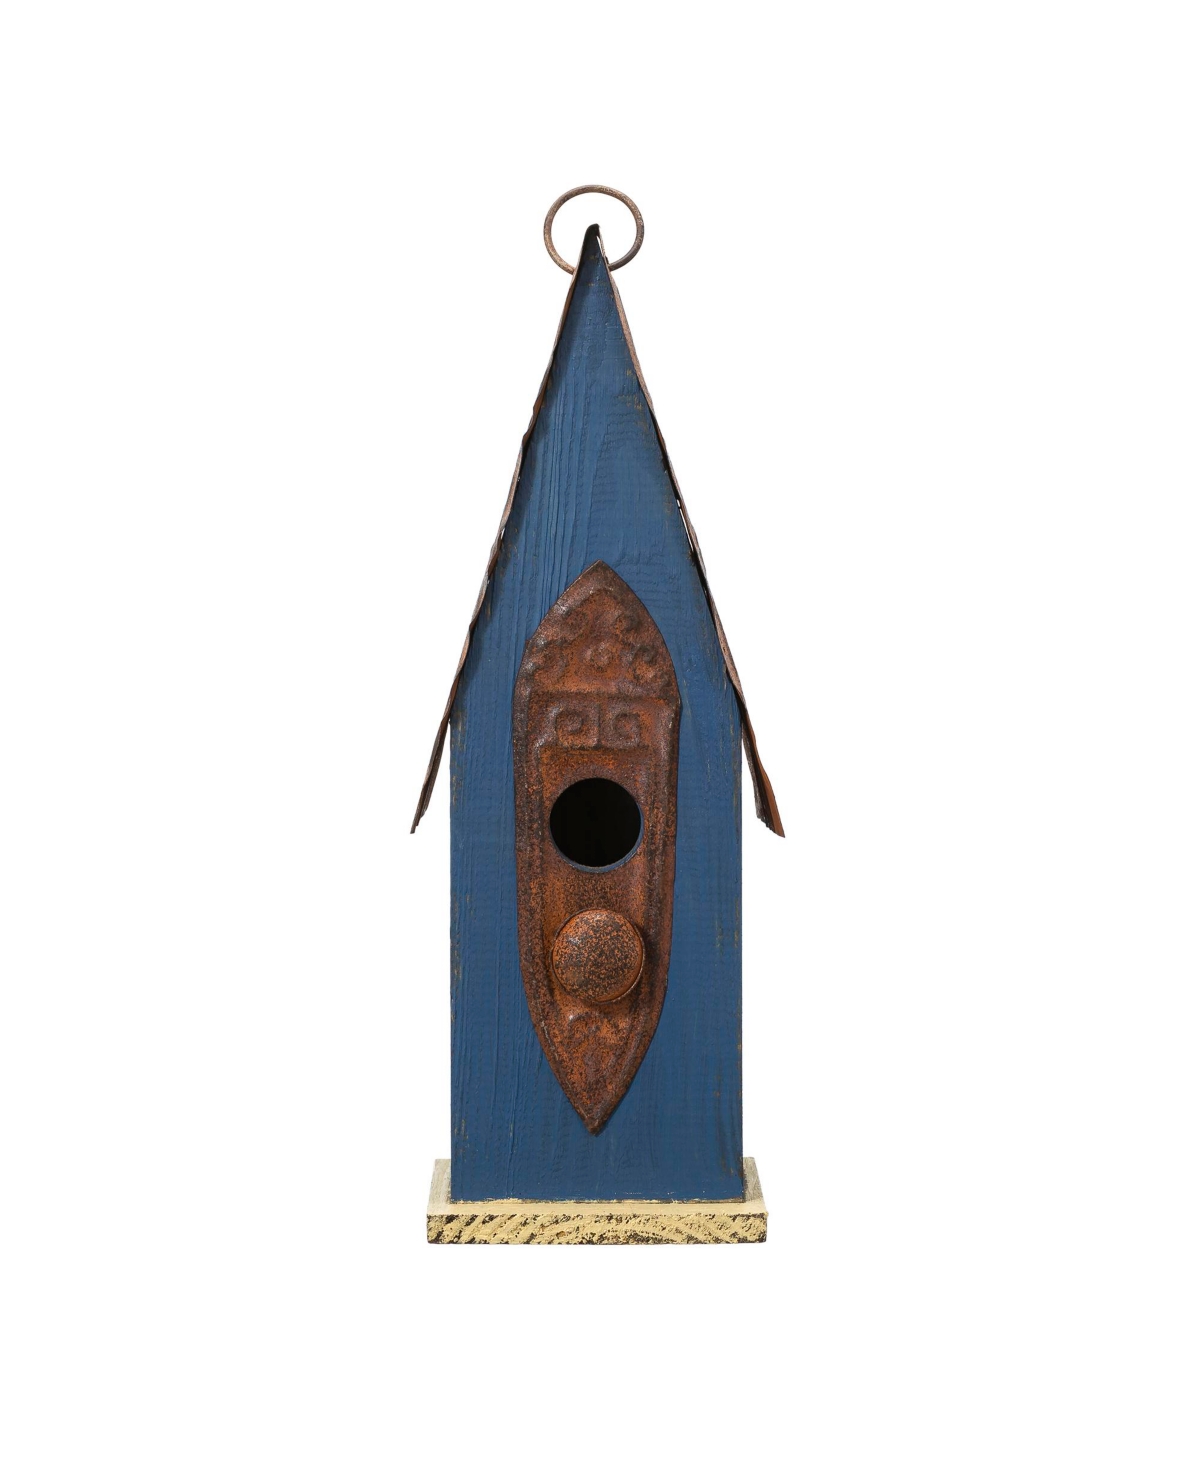 Glitzhome 13.25" H Retro-like Distressed Solid Wood Birdhouse In Blue